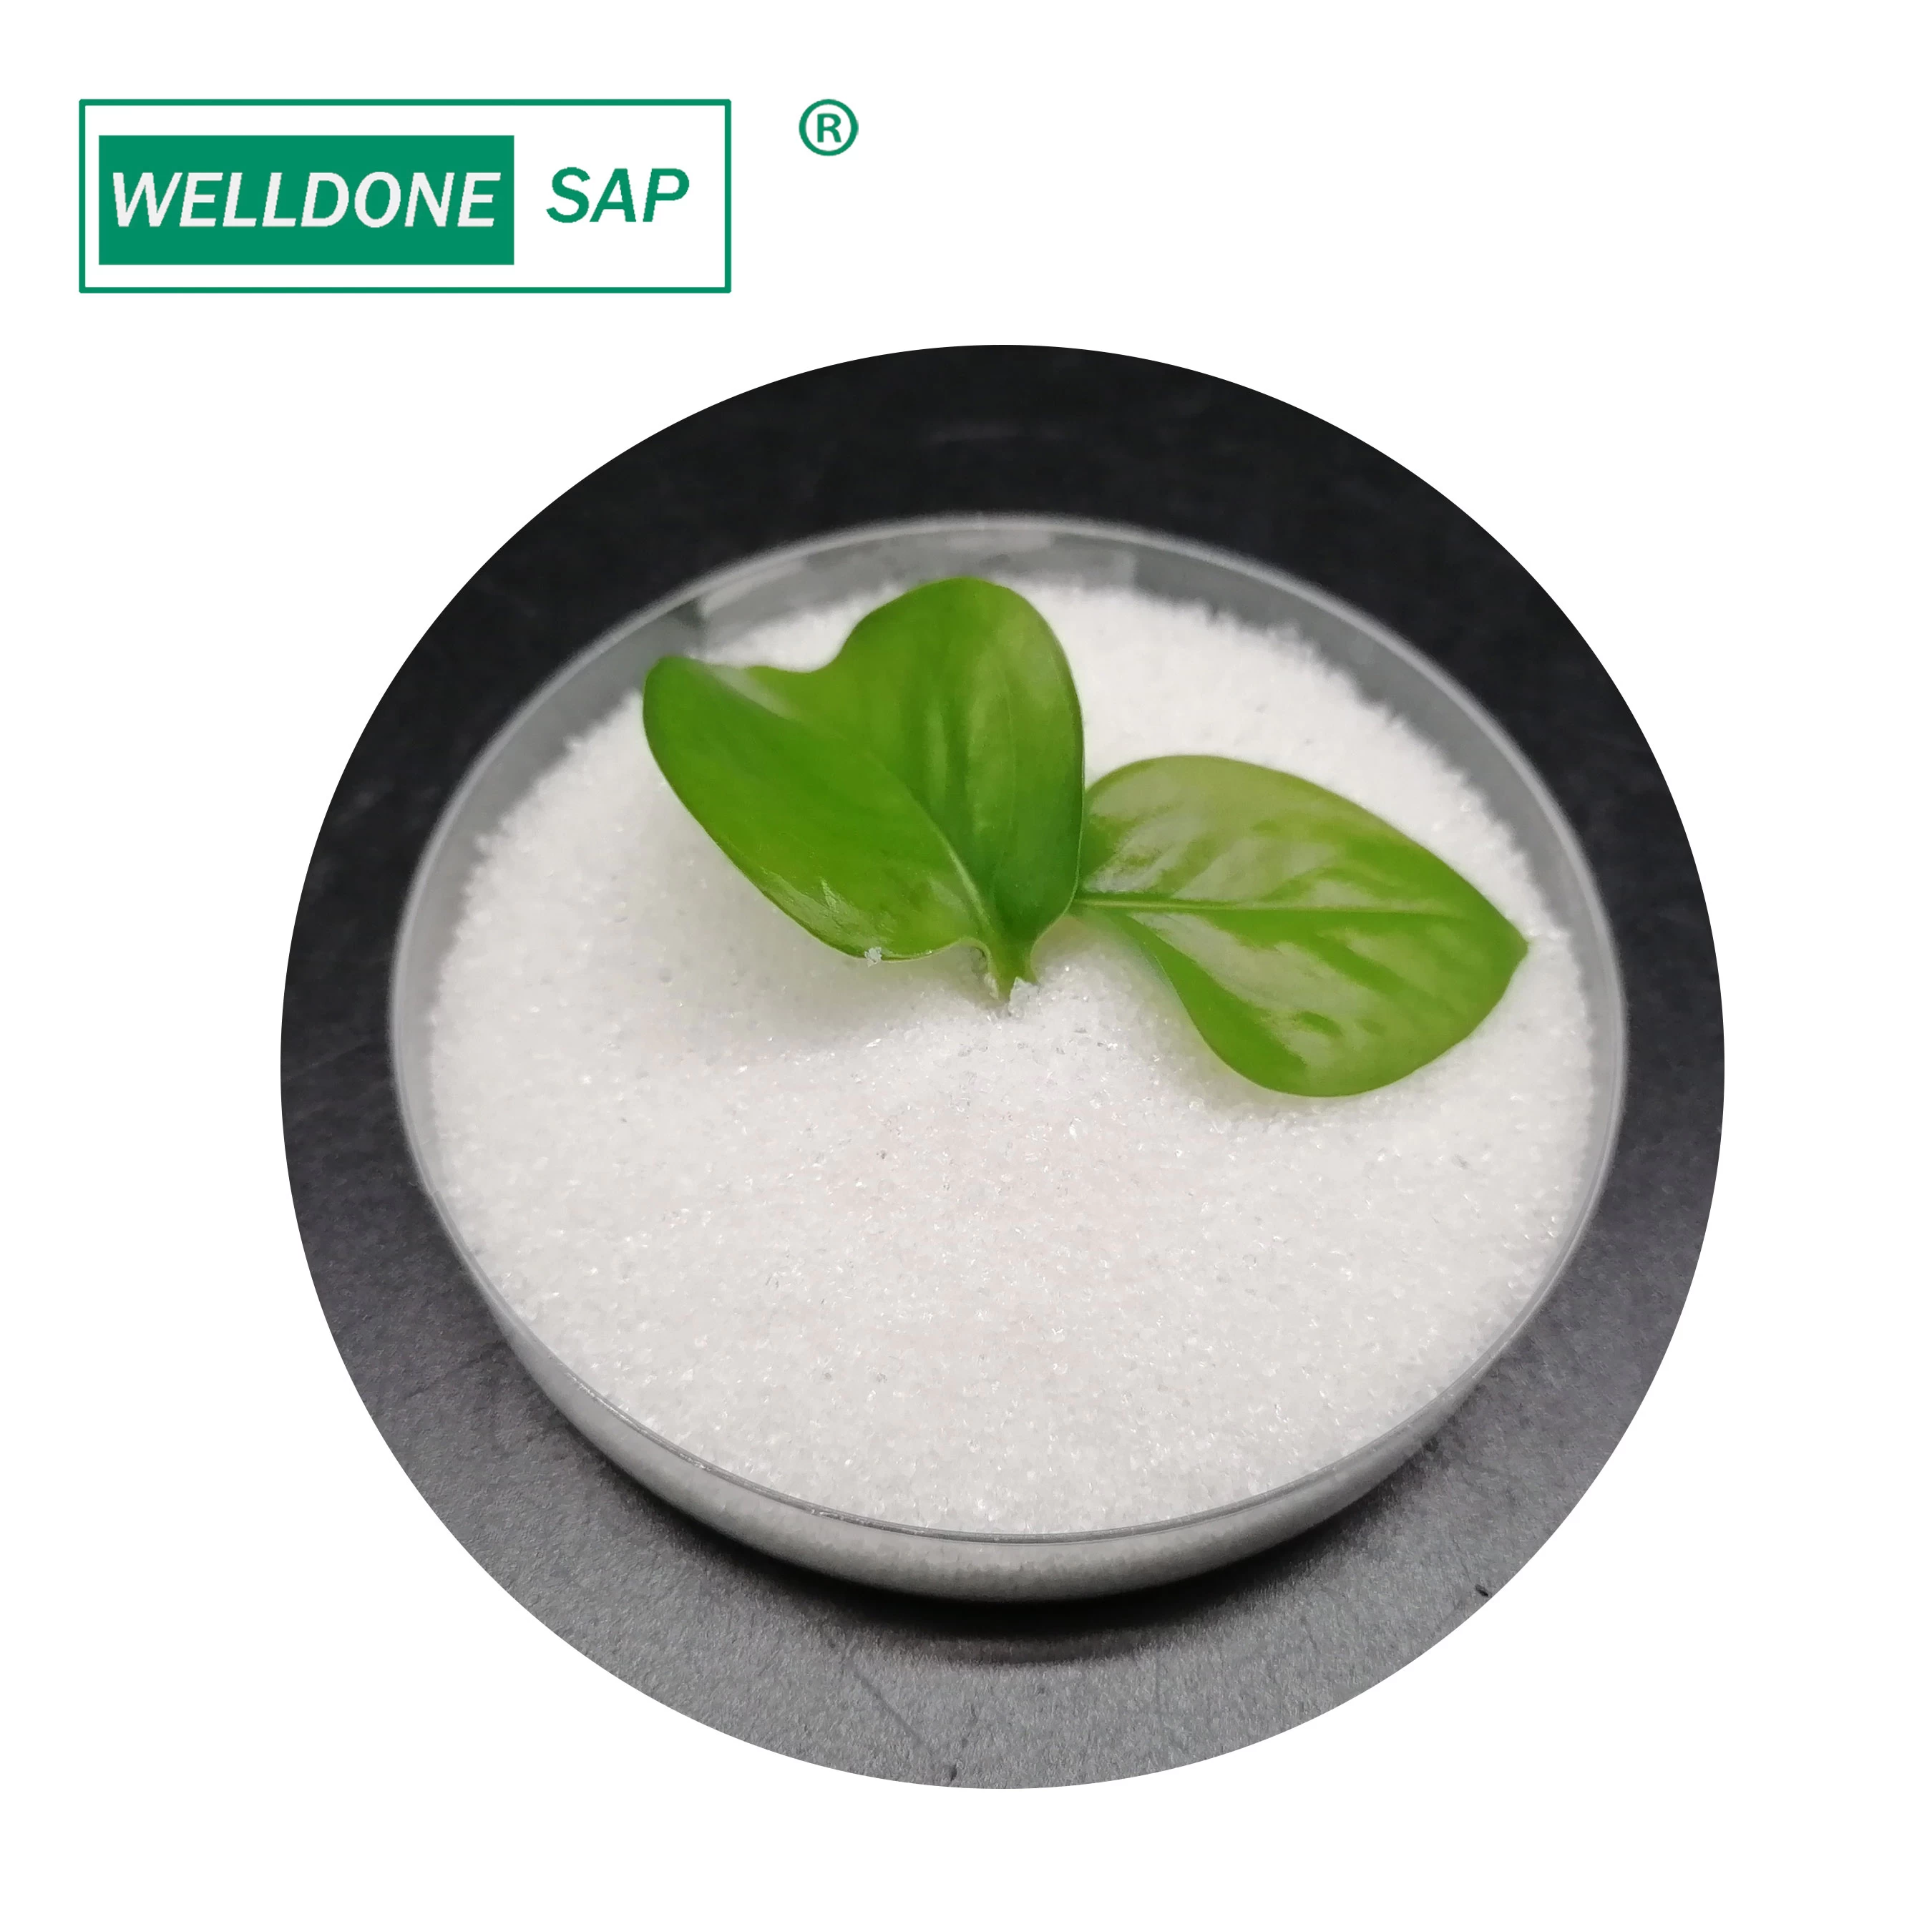 Agriculture grade Potassium Polyacrylate For Seed Coating SAP